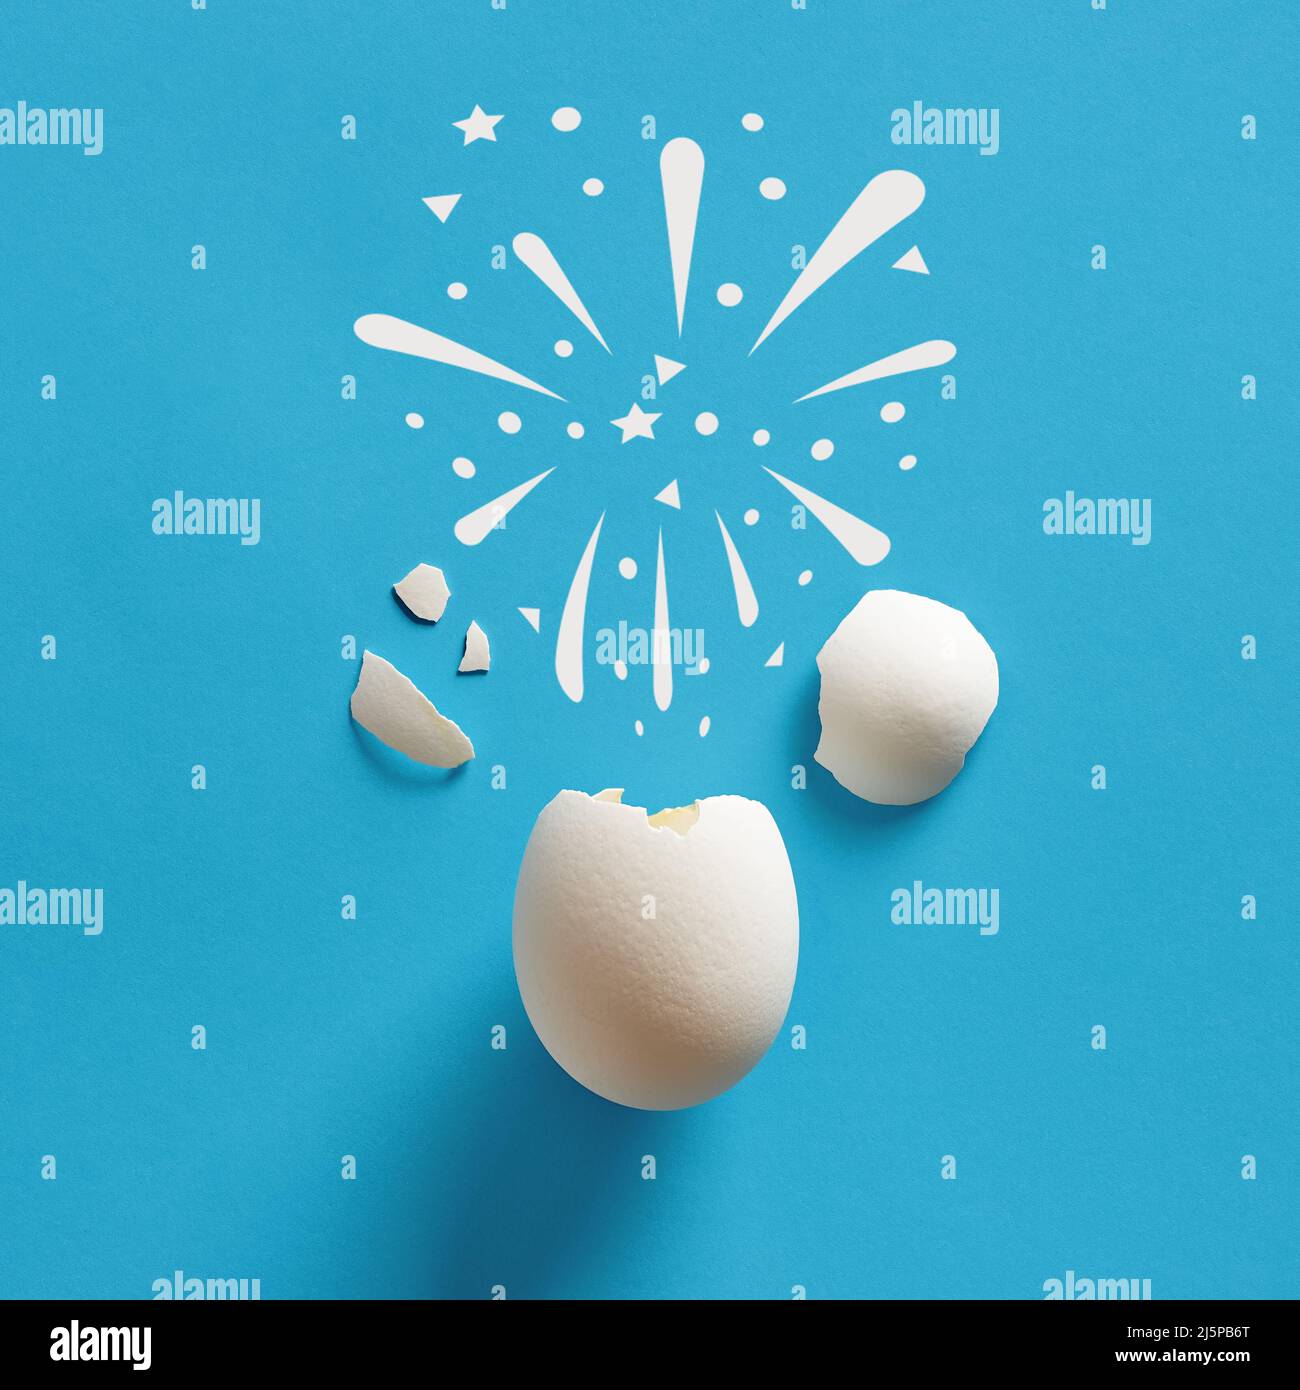 Cracked white chicken egg shell with fireworks symbol. Celebration, birthday, surprise concepts. Stock Photo